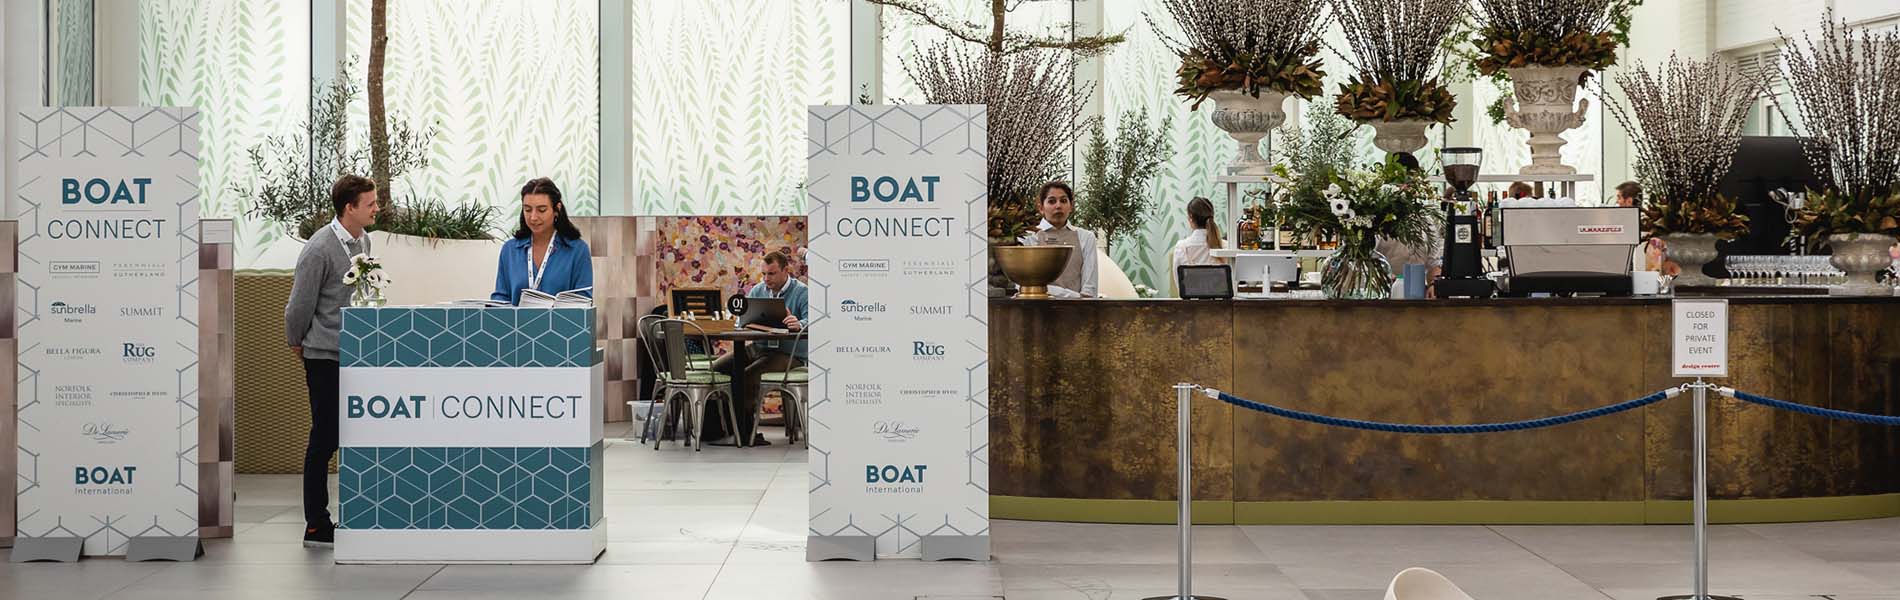 The Sunbrella team was in London for the Boat Connect event